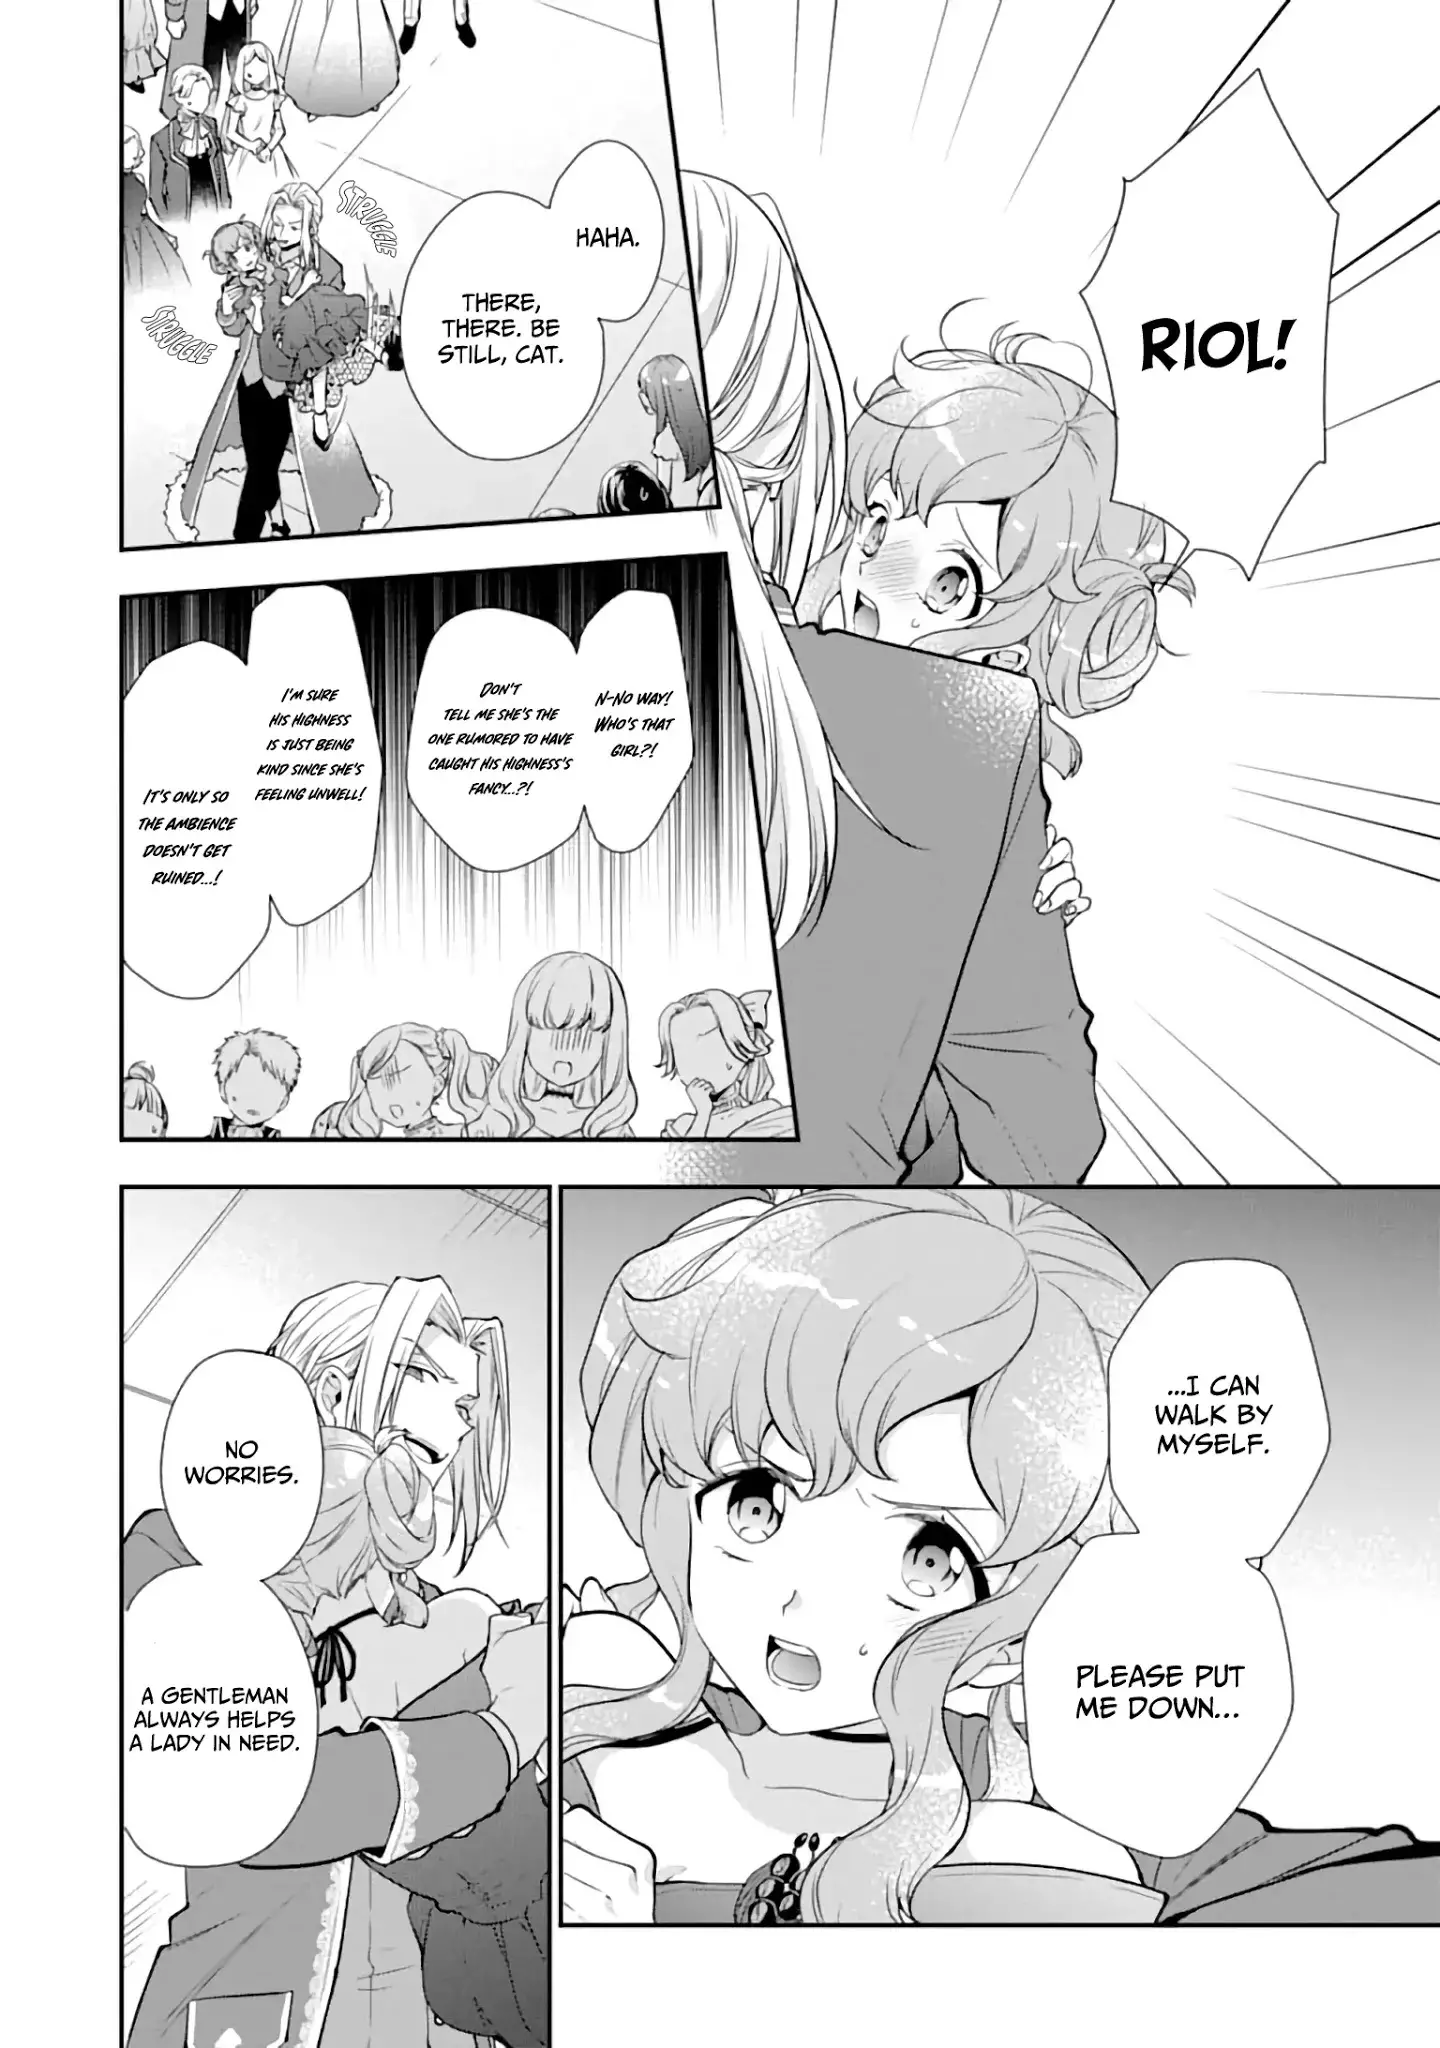 The Noble Girl With A Crush On A Plain And Studious Guy Finds The Arrogant Prince To Be A Nuisance - 5 page 12